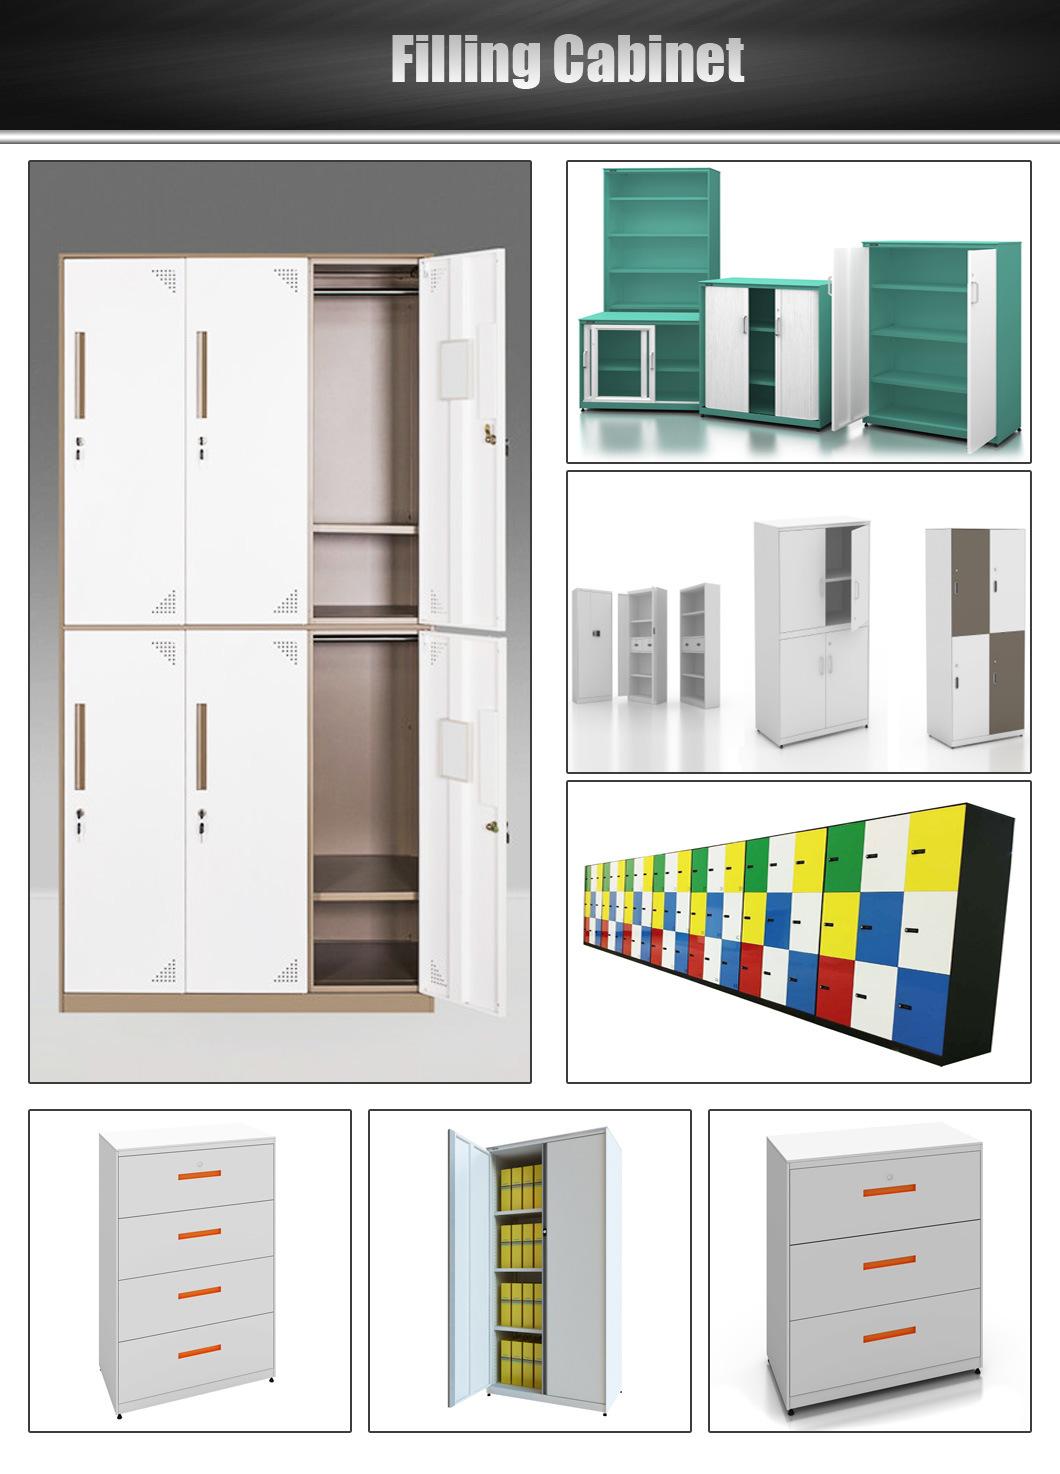 Advanced Technology Work Storage Cabinets with Environmentally-Friendly Materials